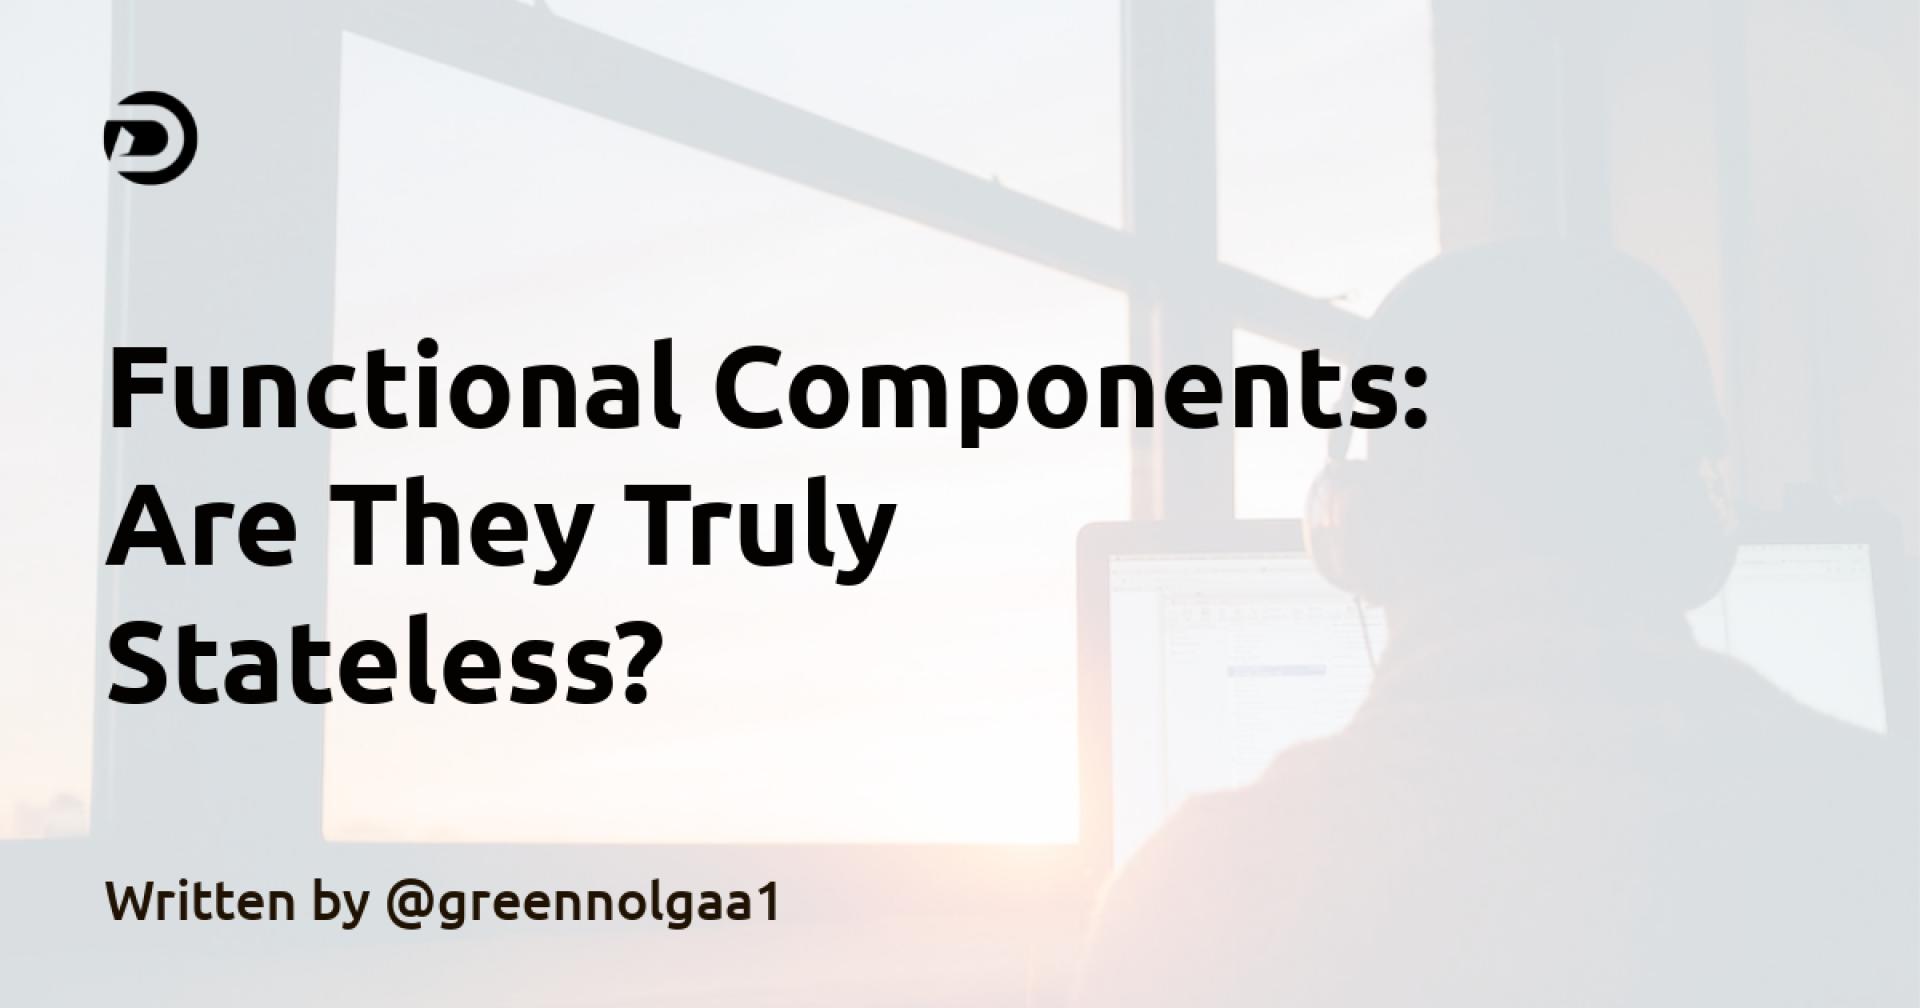 Functional Components: Are They Truly Stateless?